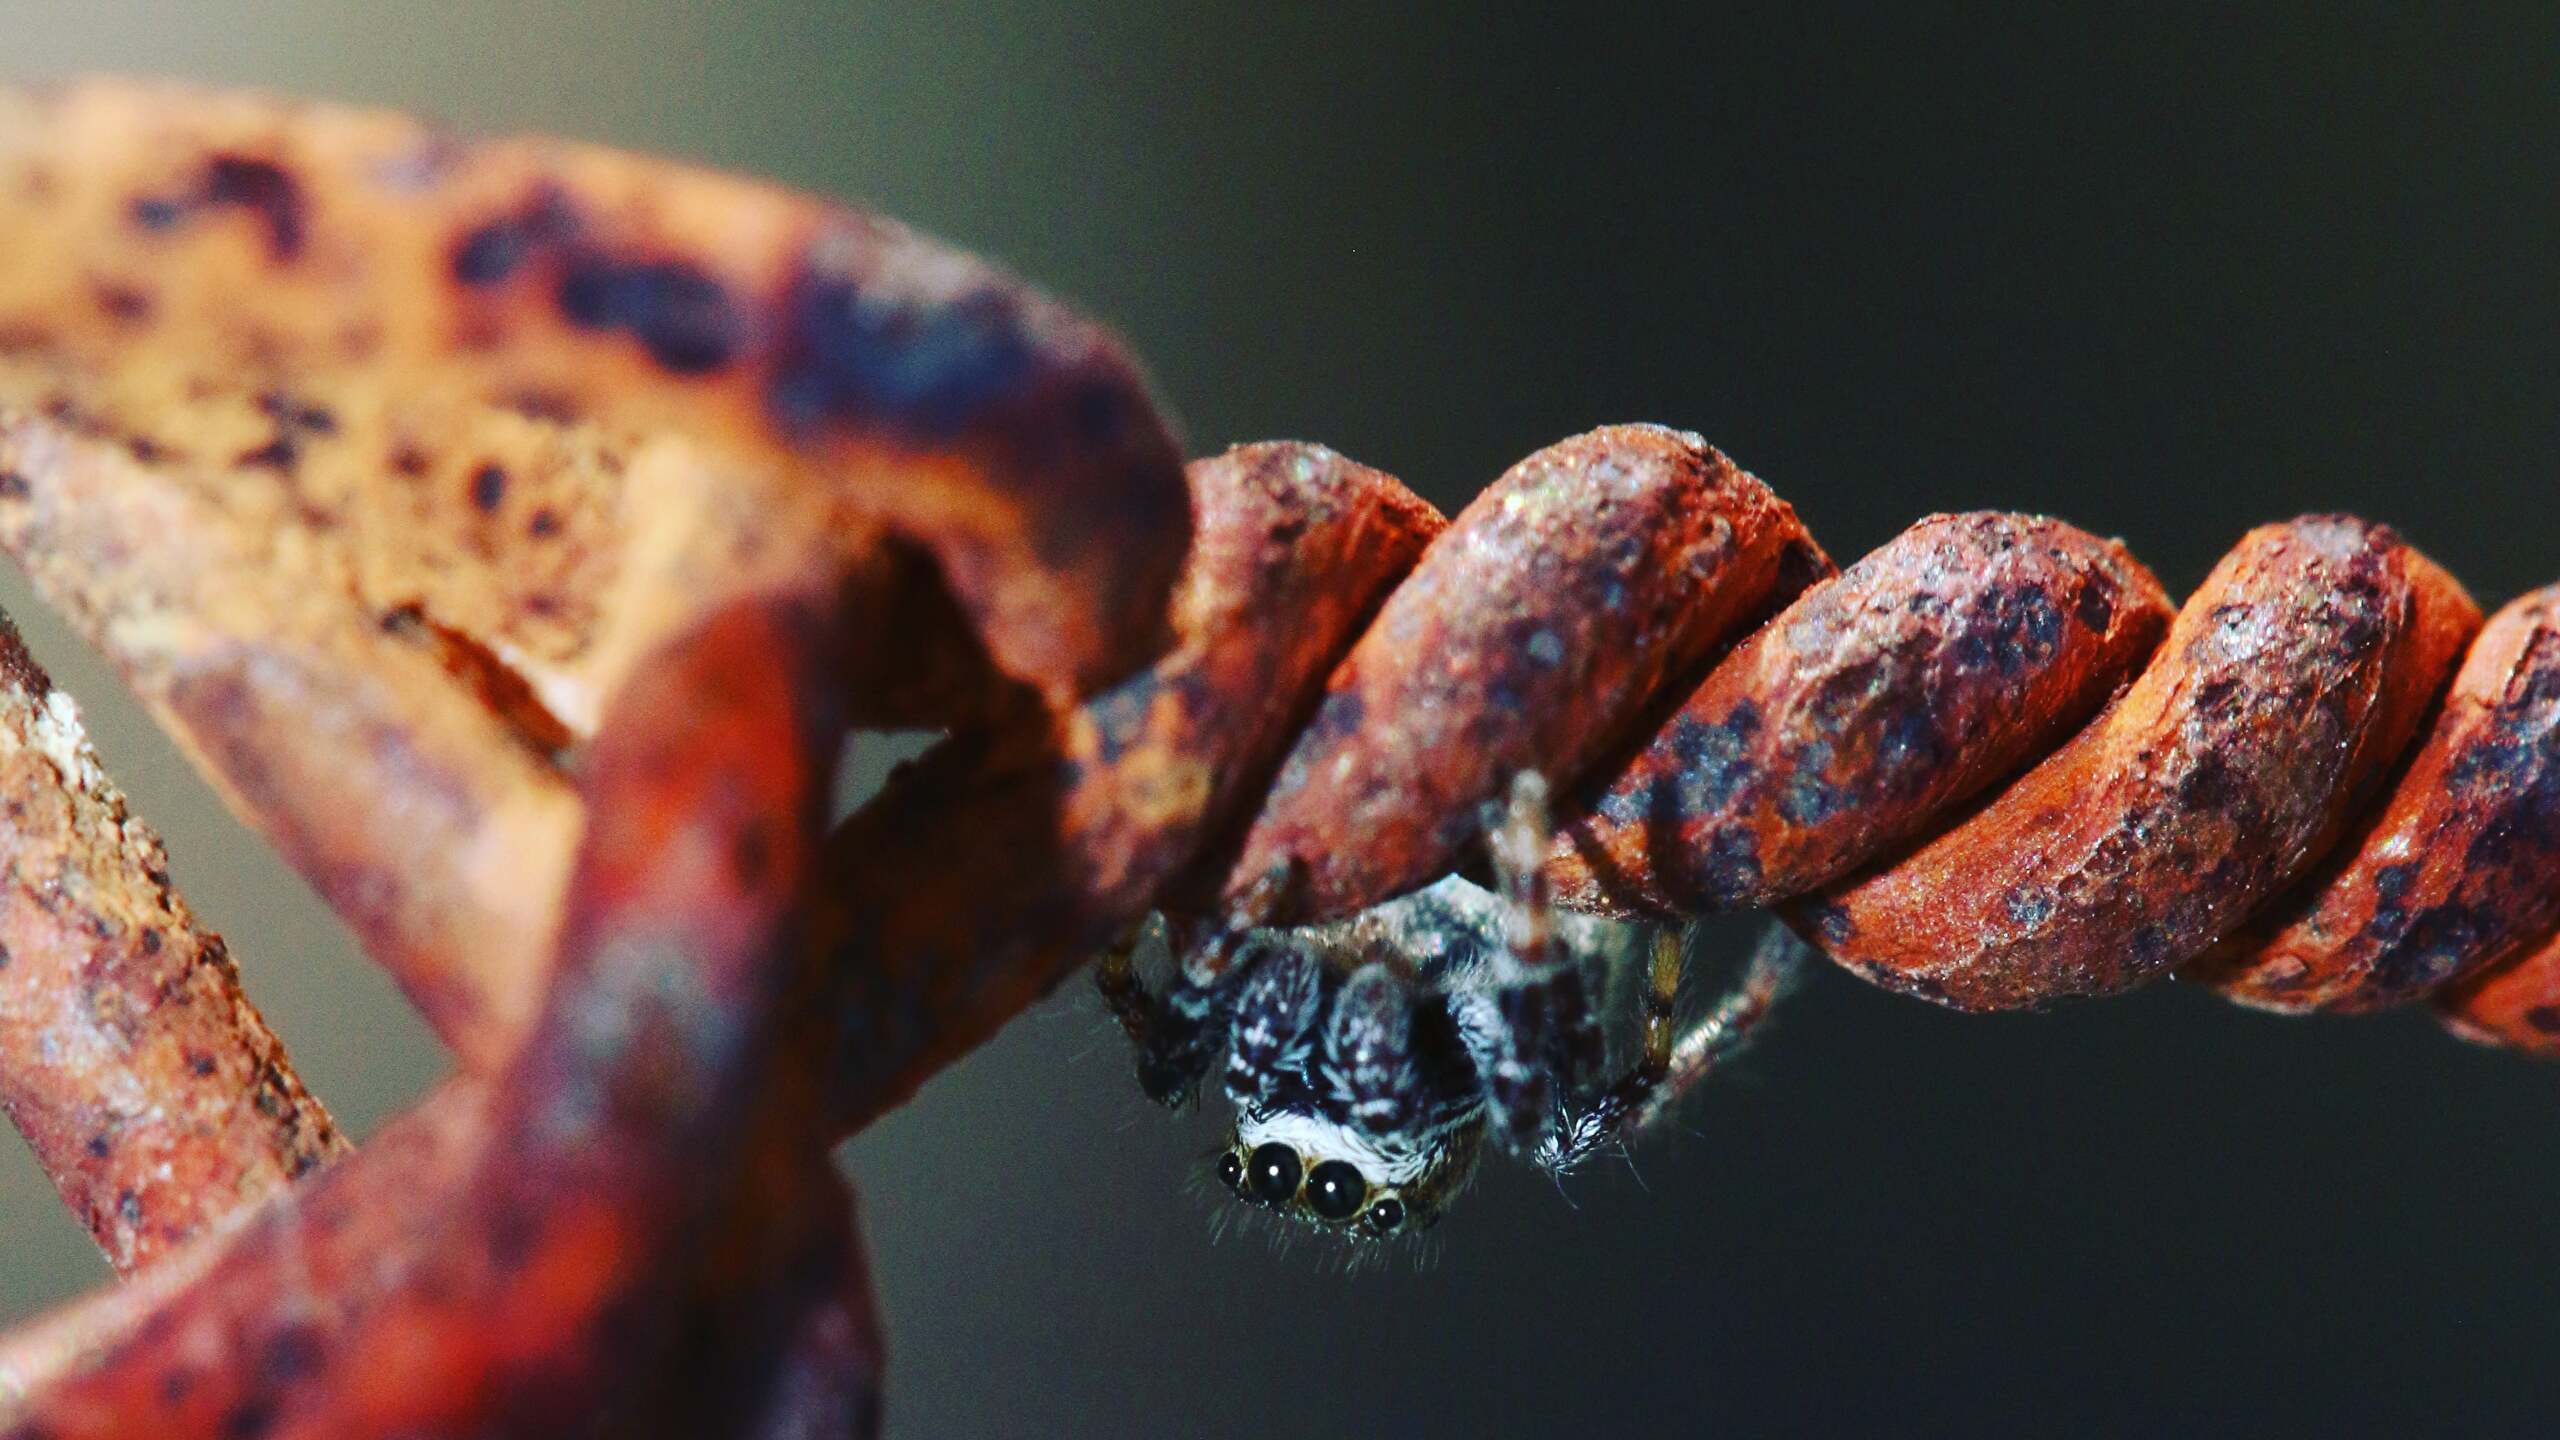 Jumping Spider On A Barbed Wire Fence. [2560 X 1440]